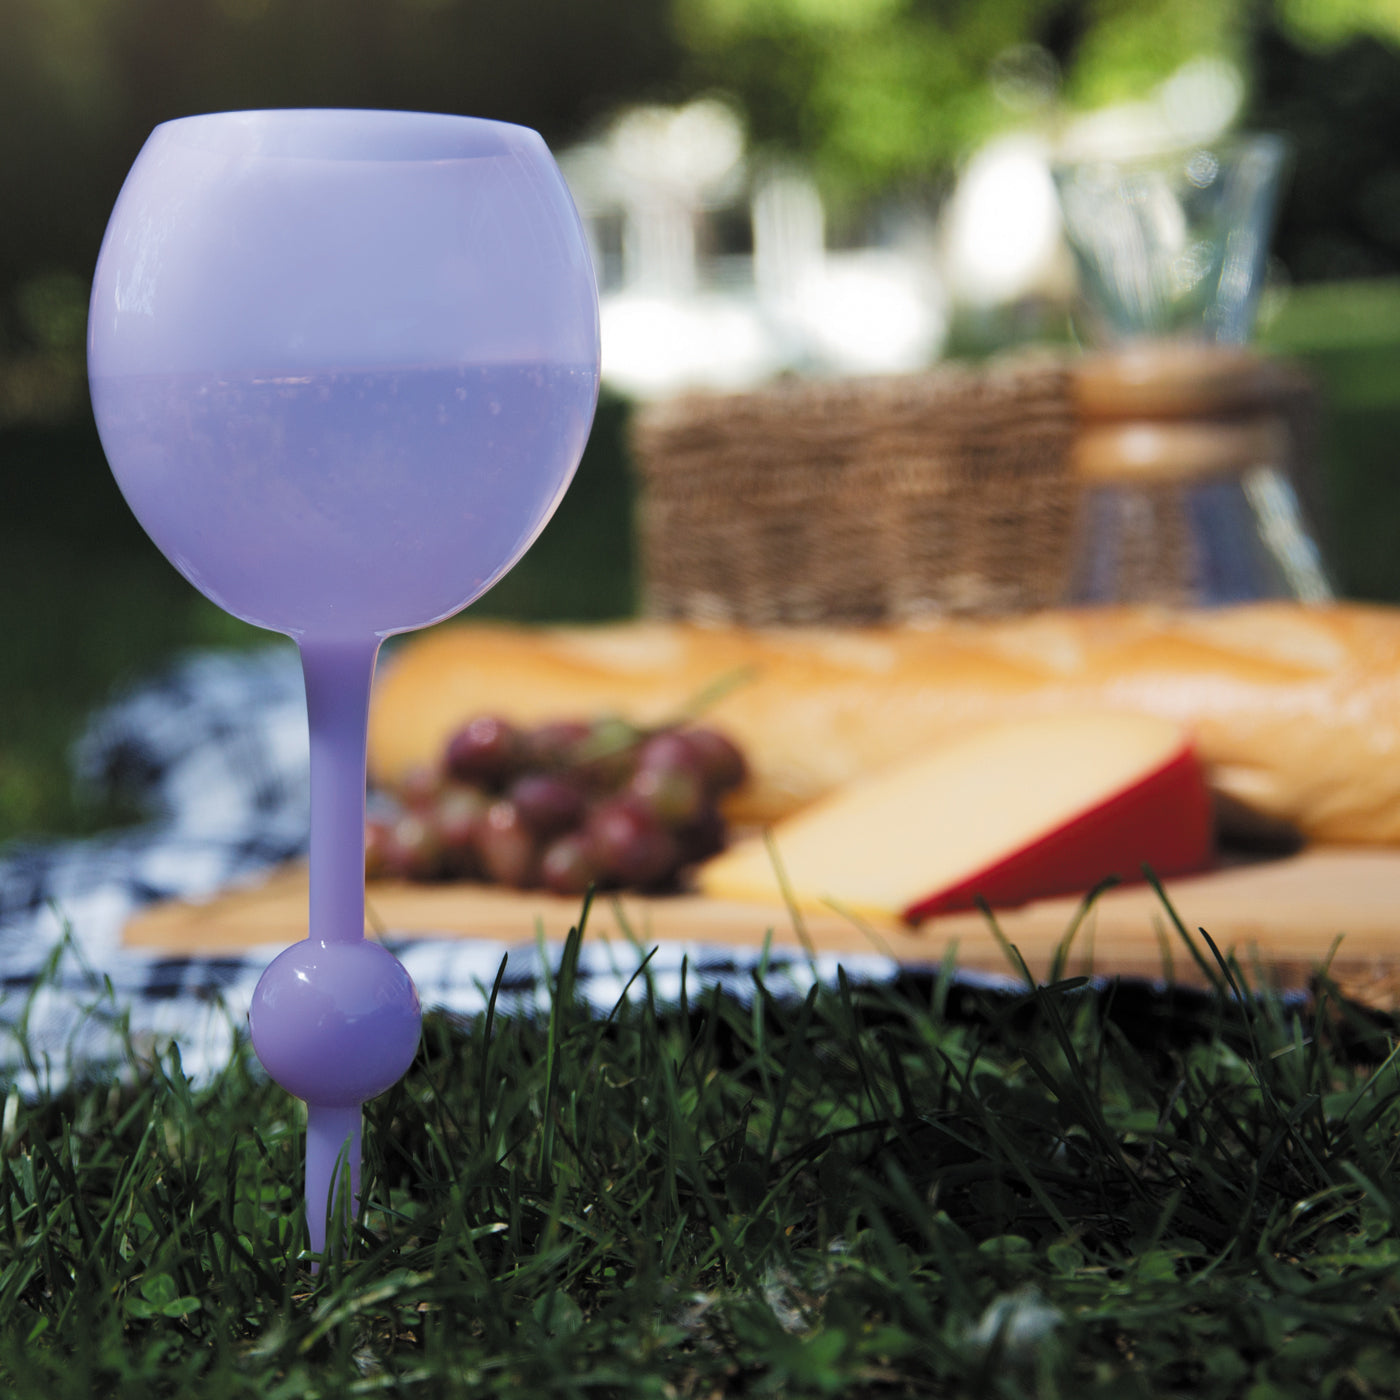 The Floating Wine Glass